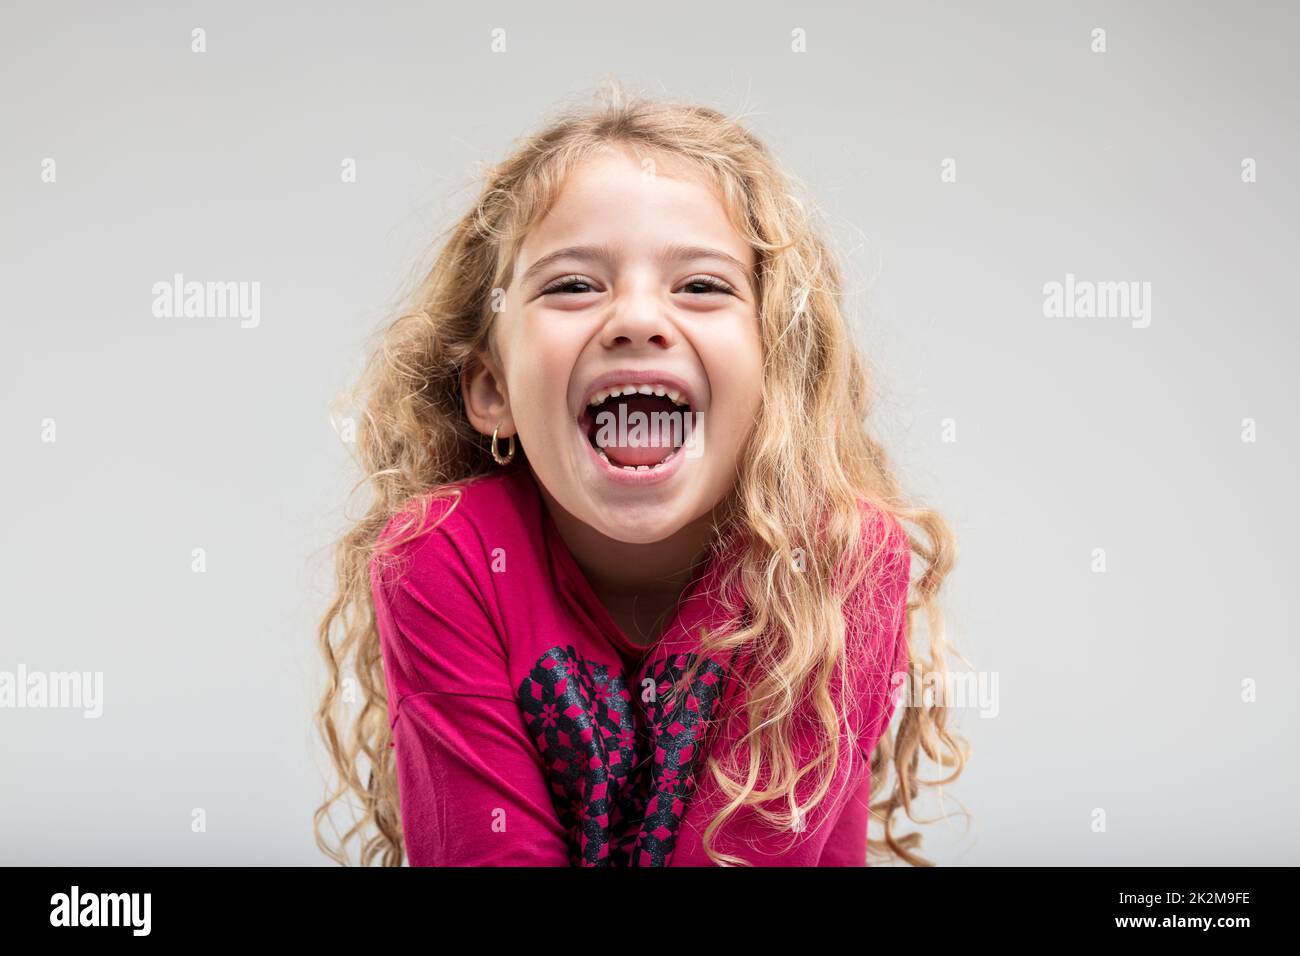 Laughing schoolgirl with curly hair Stock Photo